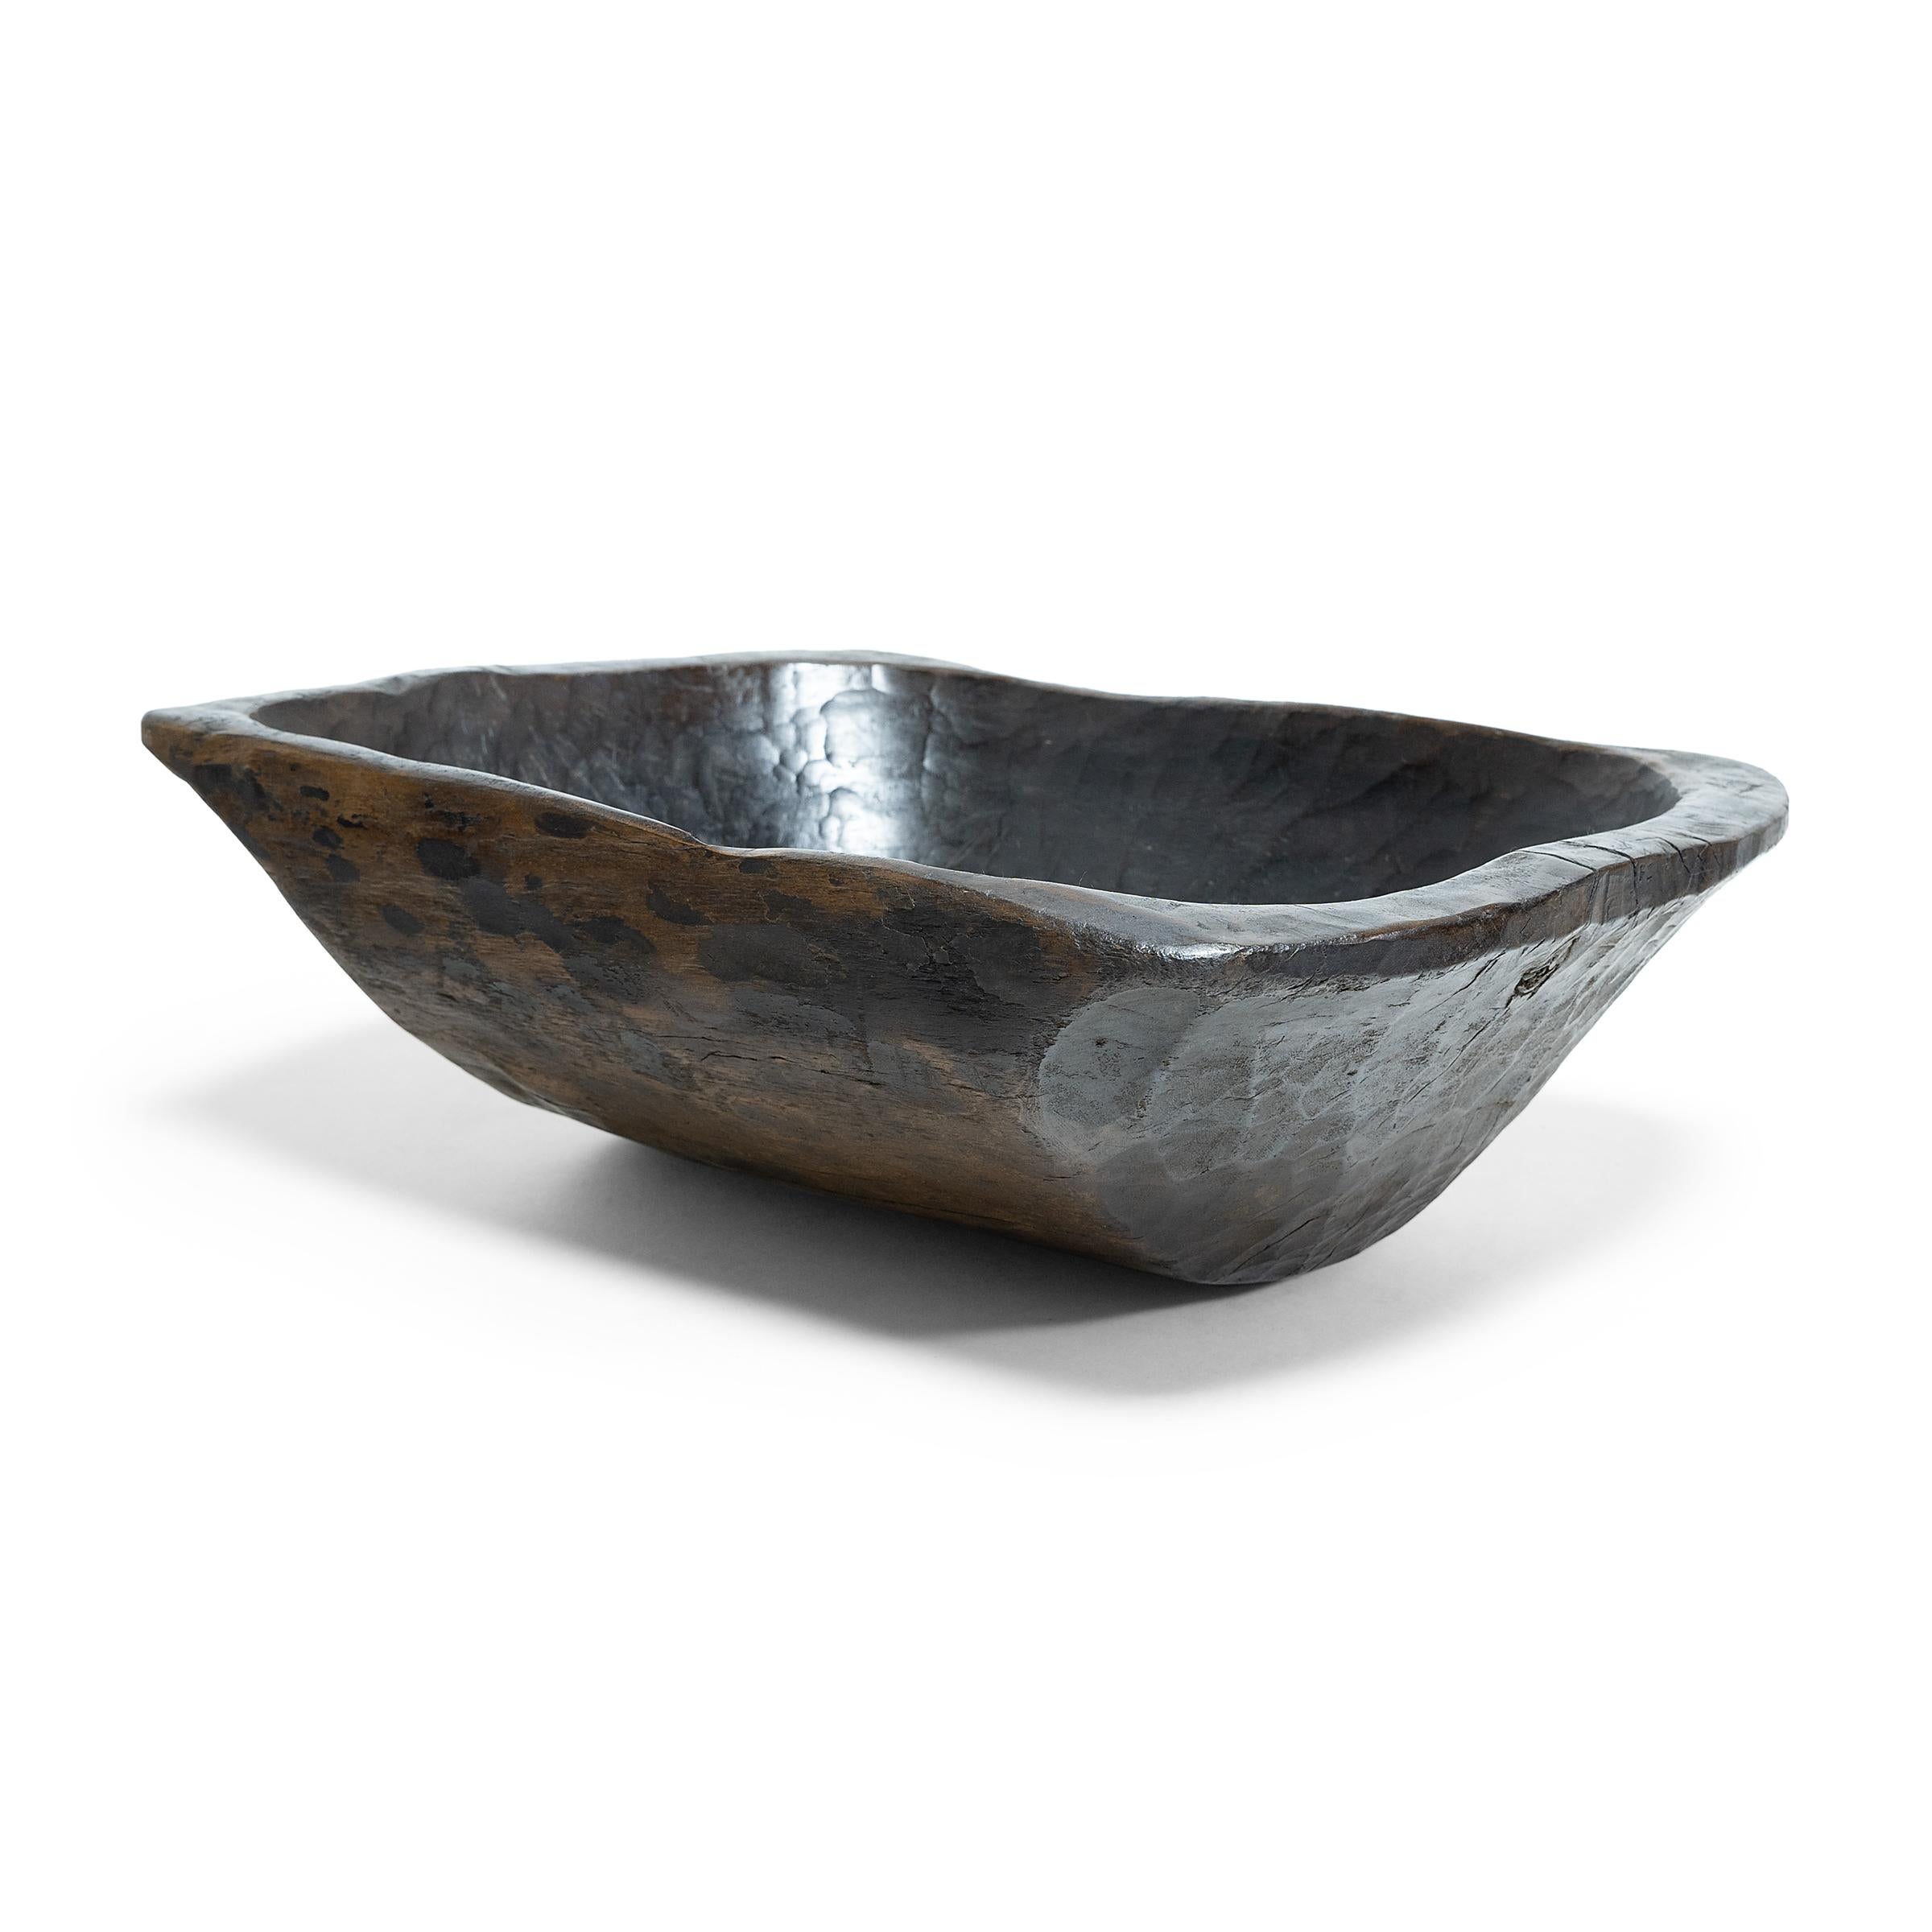 This wooden farm tray from northern China charms with its rustic finish and asymmetrical form. Hand-carved from a single block of wood, the large tray is truly one-of-a-kind, shaped with a deep basin and tapered sides that flatten at the rim. The